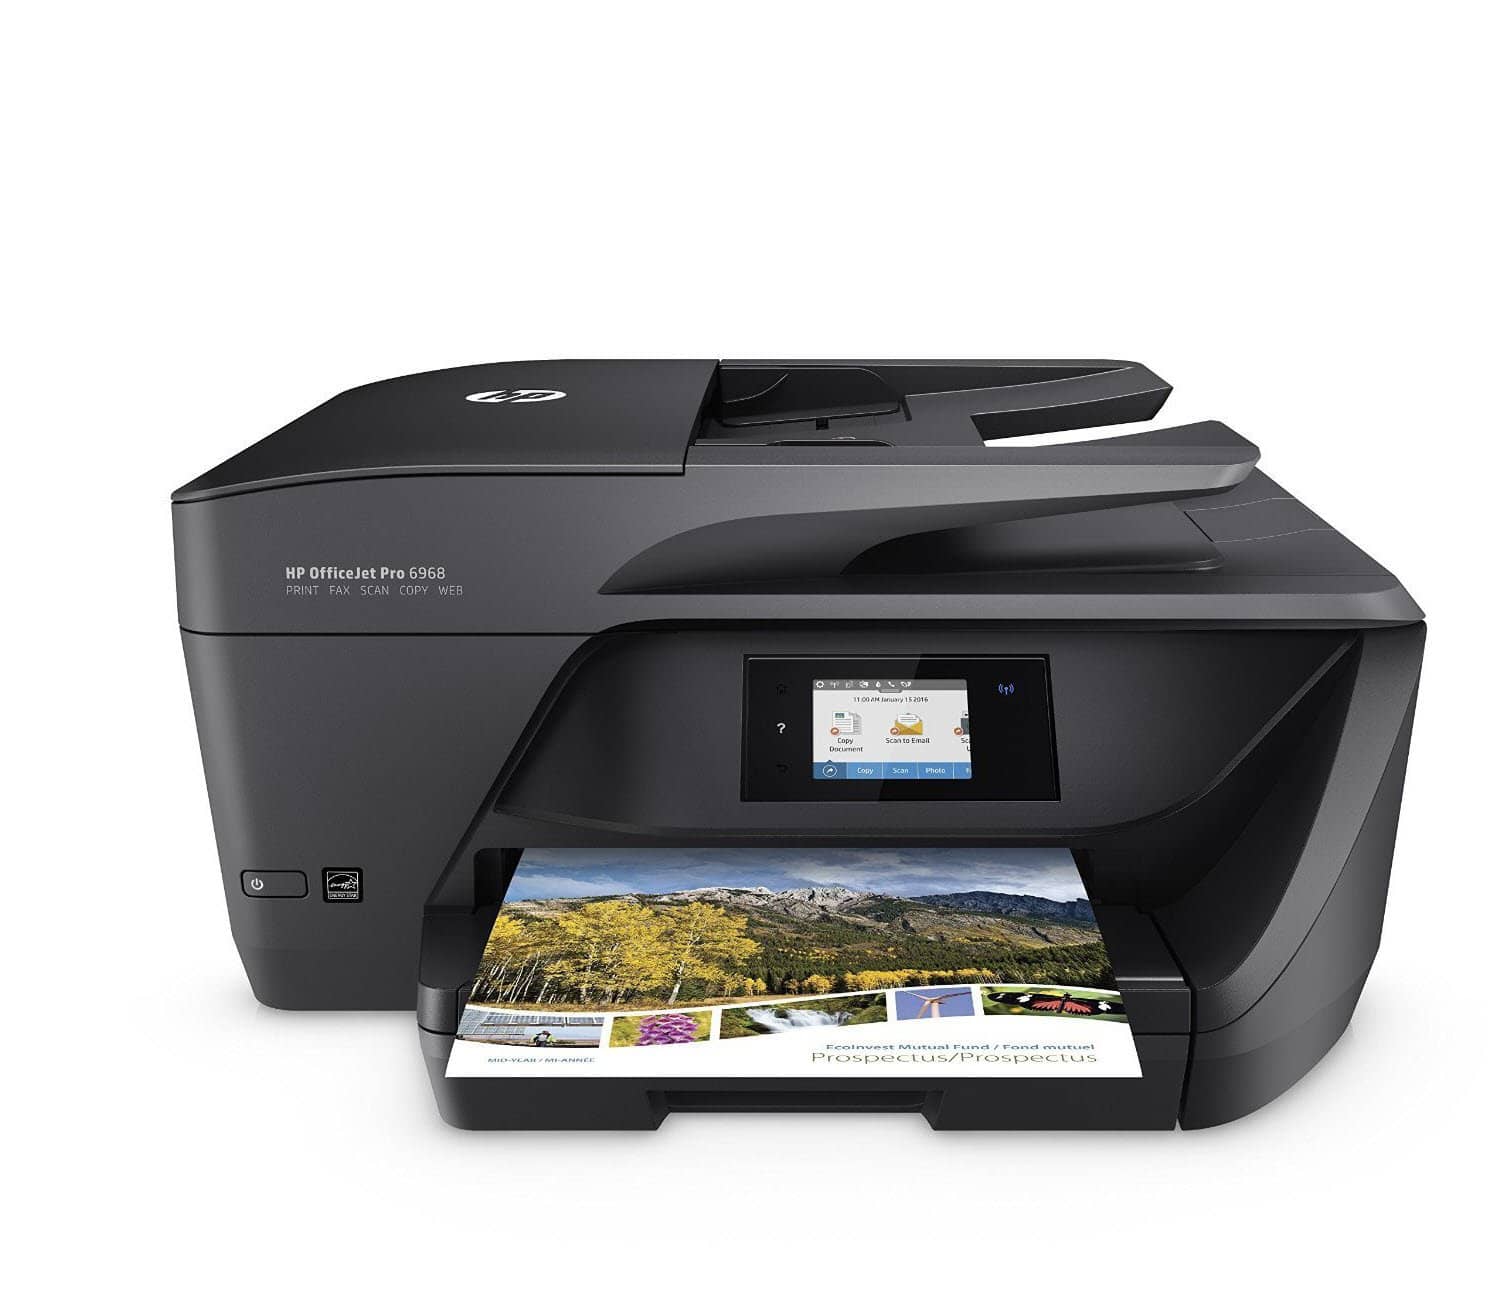 HP OfficeJet Pro 6968 Wireless All-in-One Photo Printer with Standard Ink Bundle